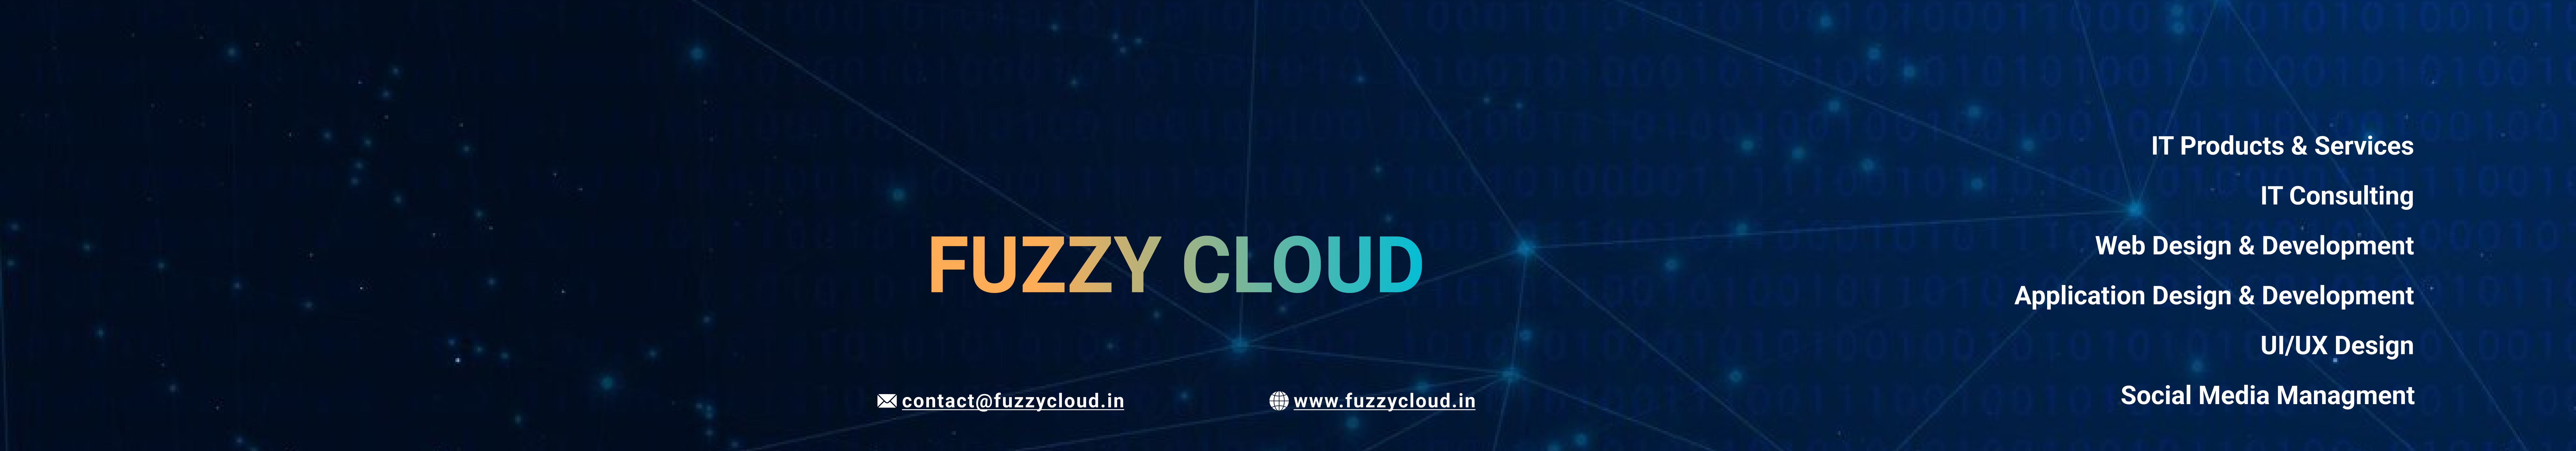 Fuzzy Cloud's profile banner